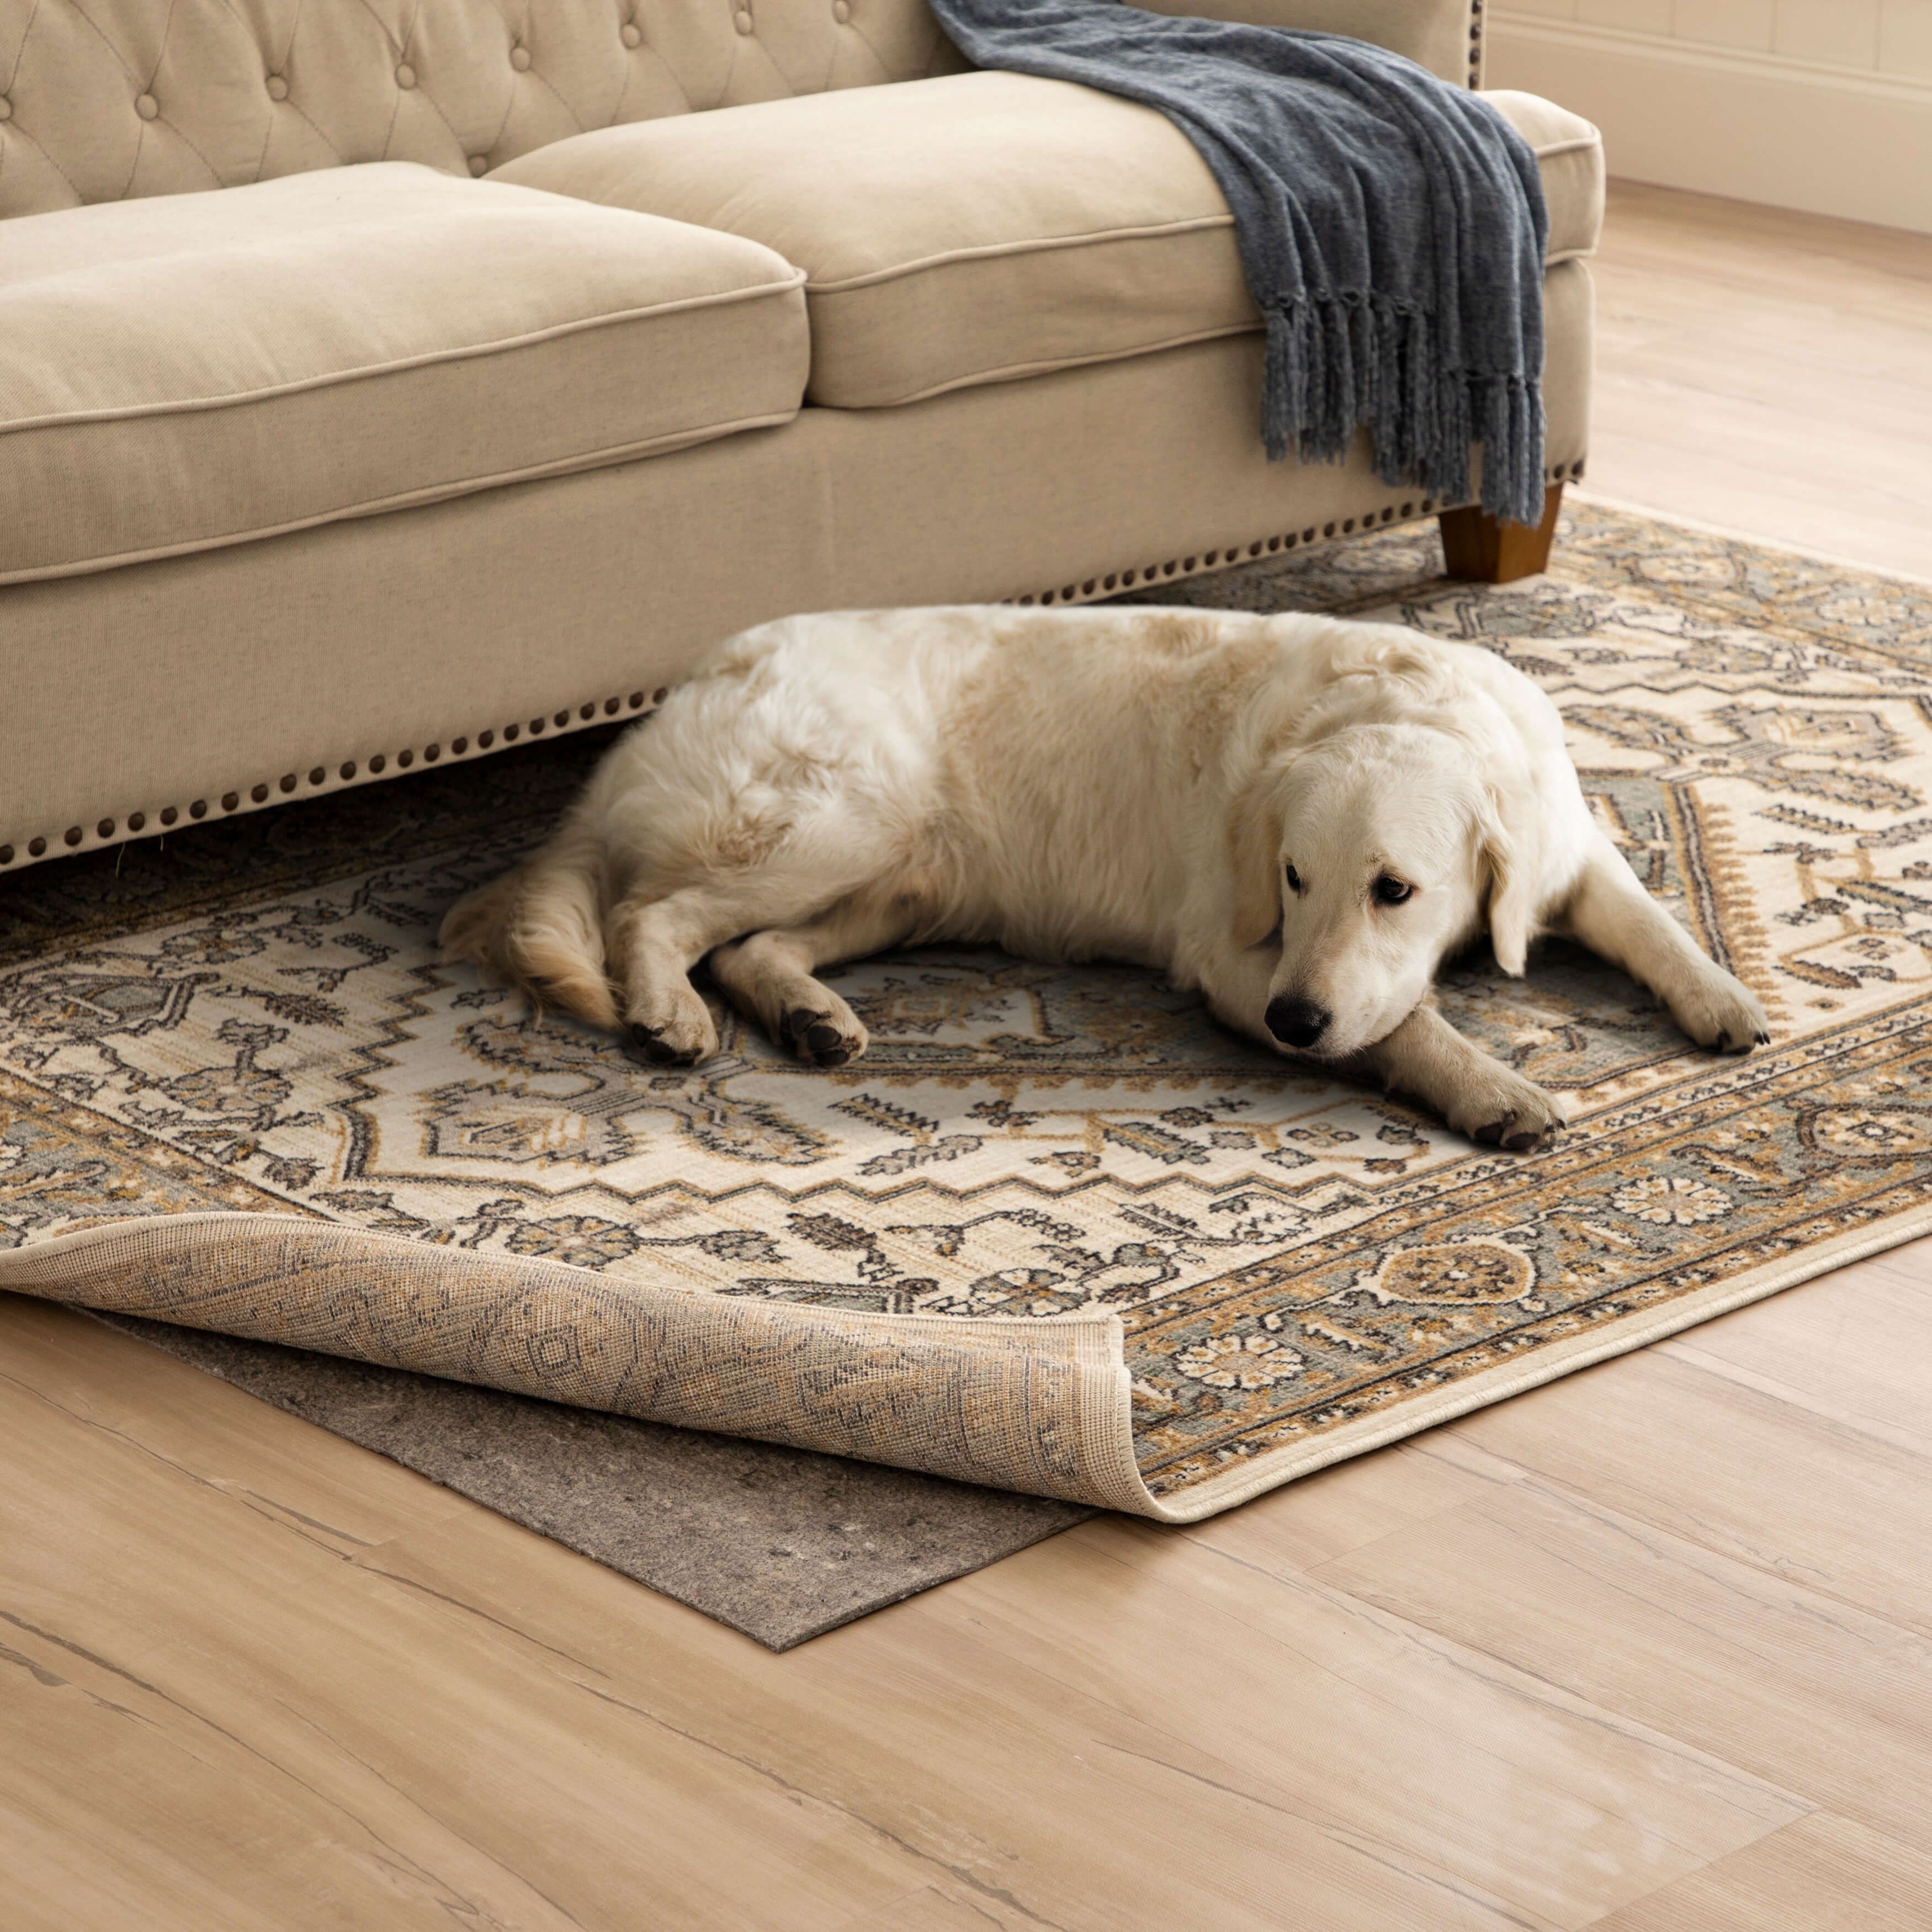 https://ak1.ostkcdn.com/images/products/is/images/direct/1a655827012771cee895817227178e5e9fecc792/Mohawk-Home-Pet-Friendly%C2%A0Rug-Pad-Spill-Proof%C2%A0Reversible-Non-Slip-Grip.jpg